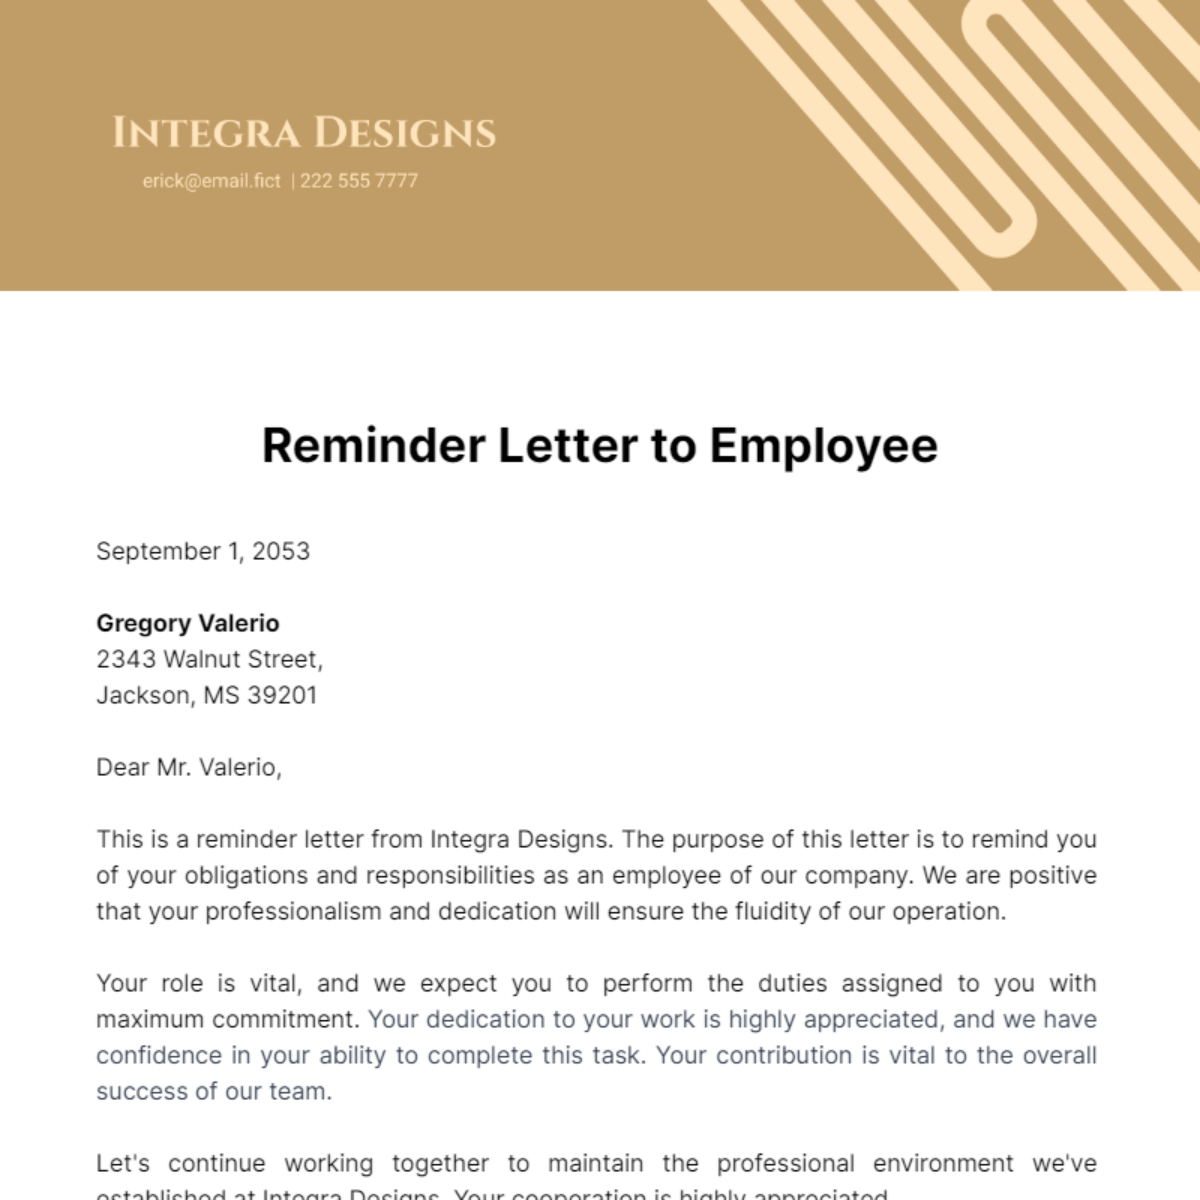 Reminder Letter to Employee Template